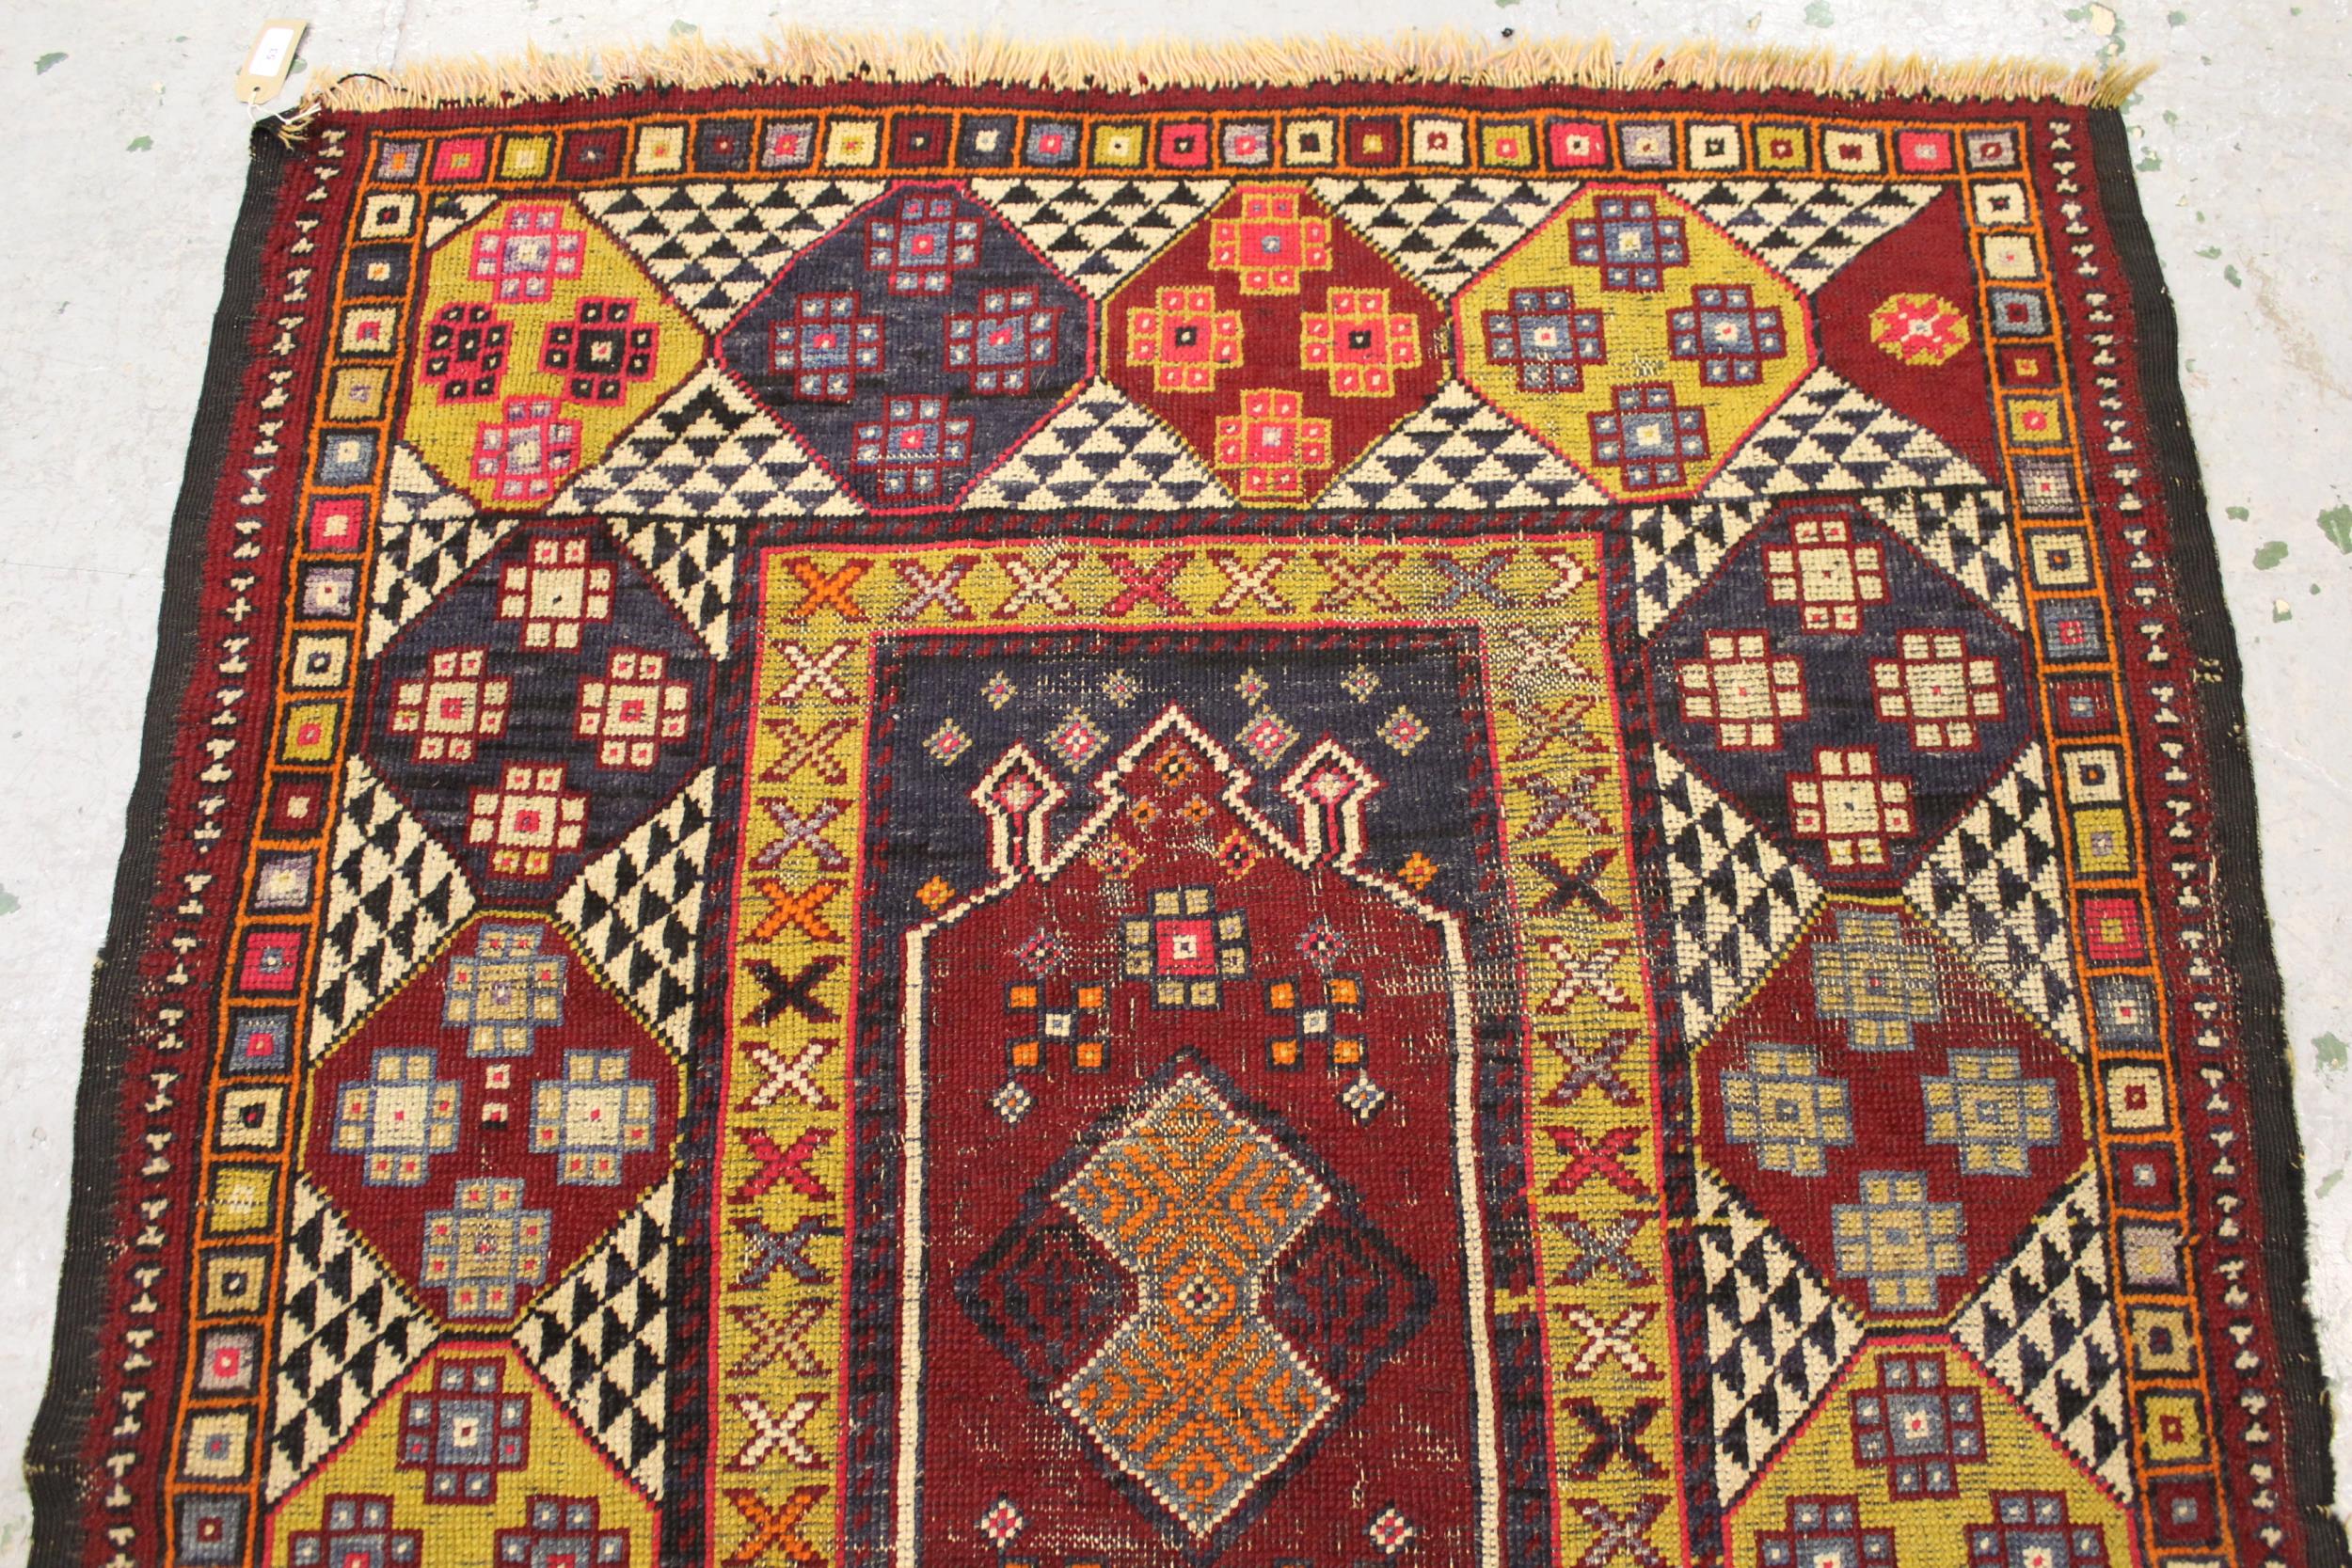 Small Anatolean rug with a central panel design and wide borders, in multiple colours, 5ft x 4ft - Image 3 of 4